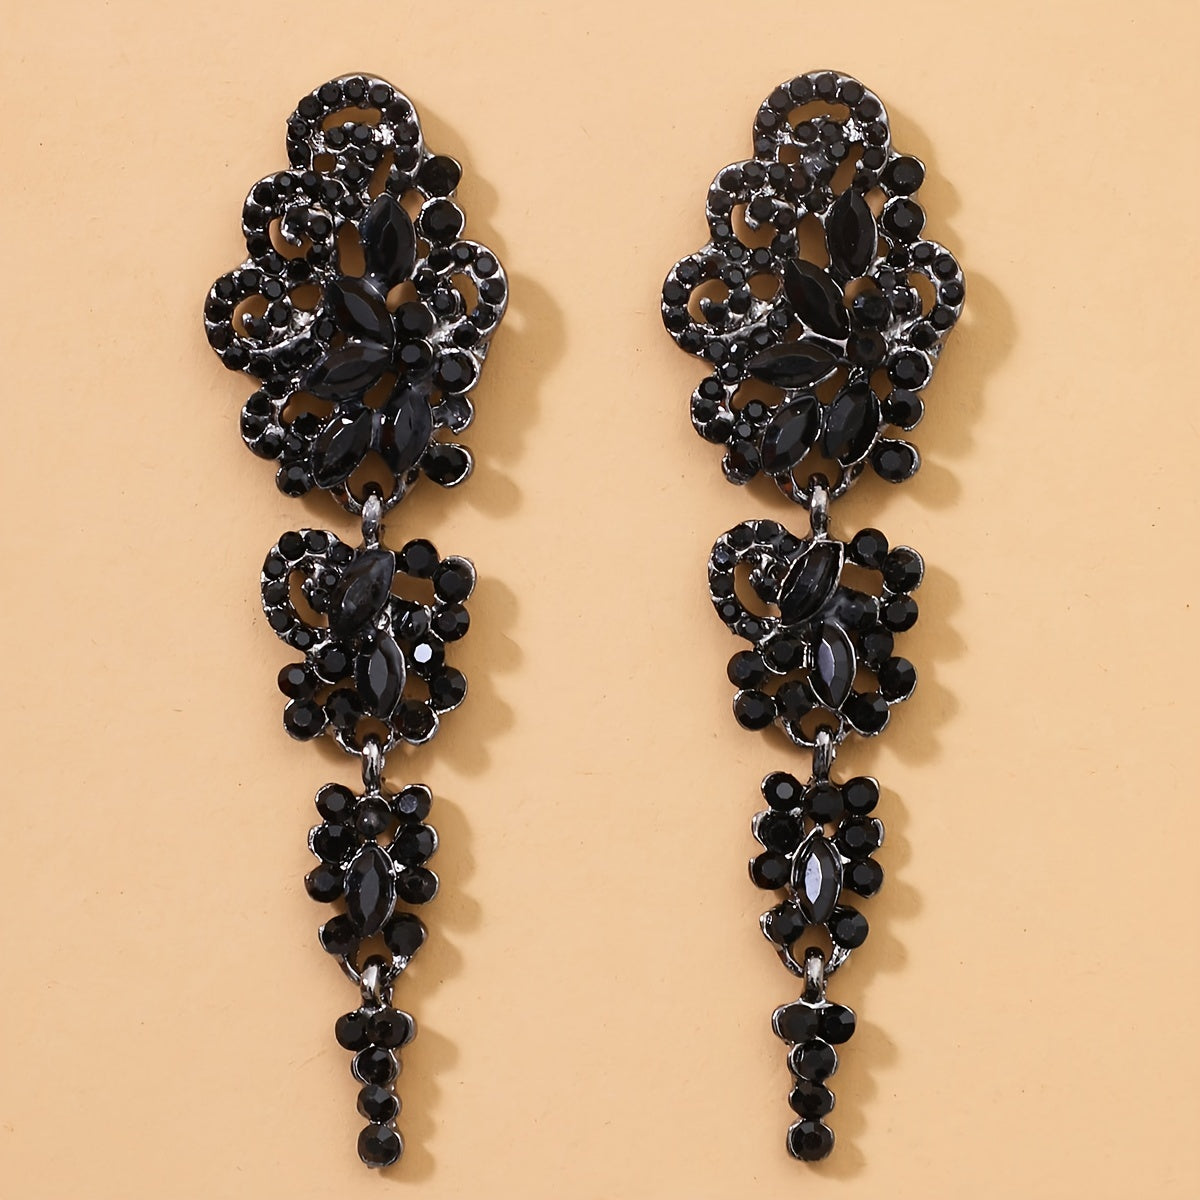 Gothic Style: Women's Black Rhinestone Drop Earrings - Add a Touch of Dark Chic to Your Look!